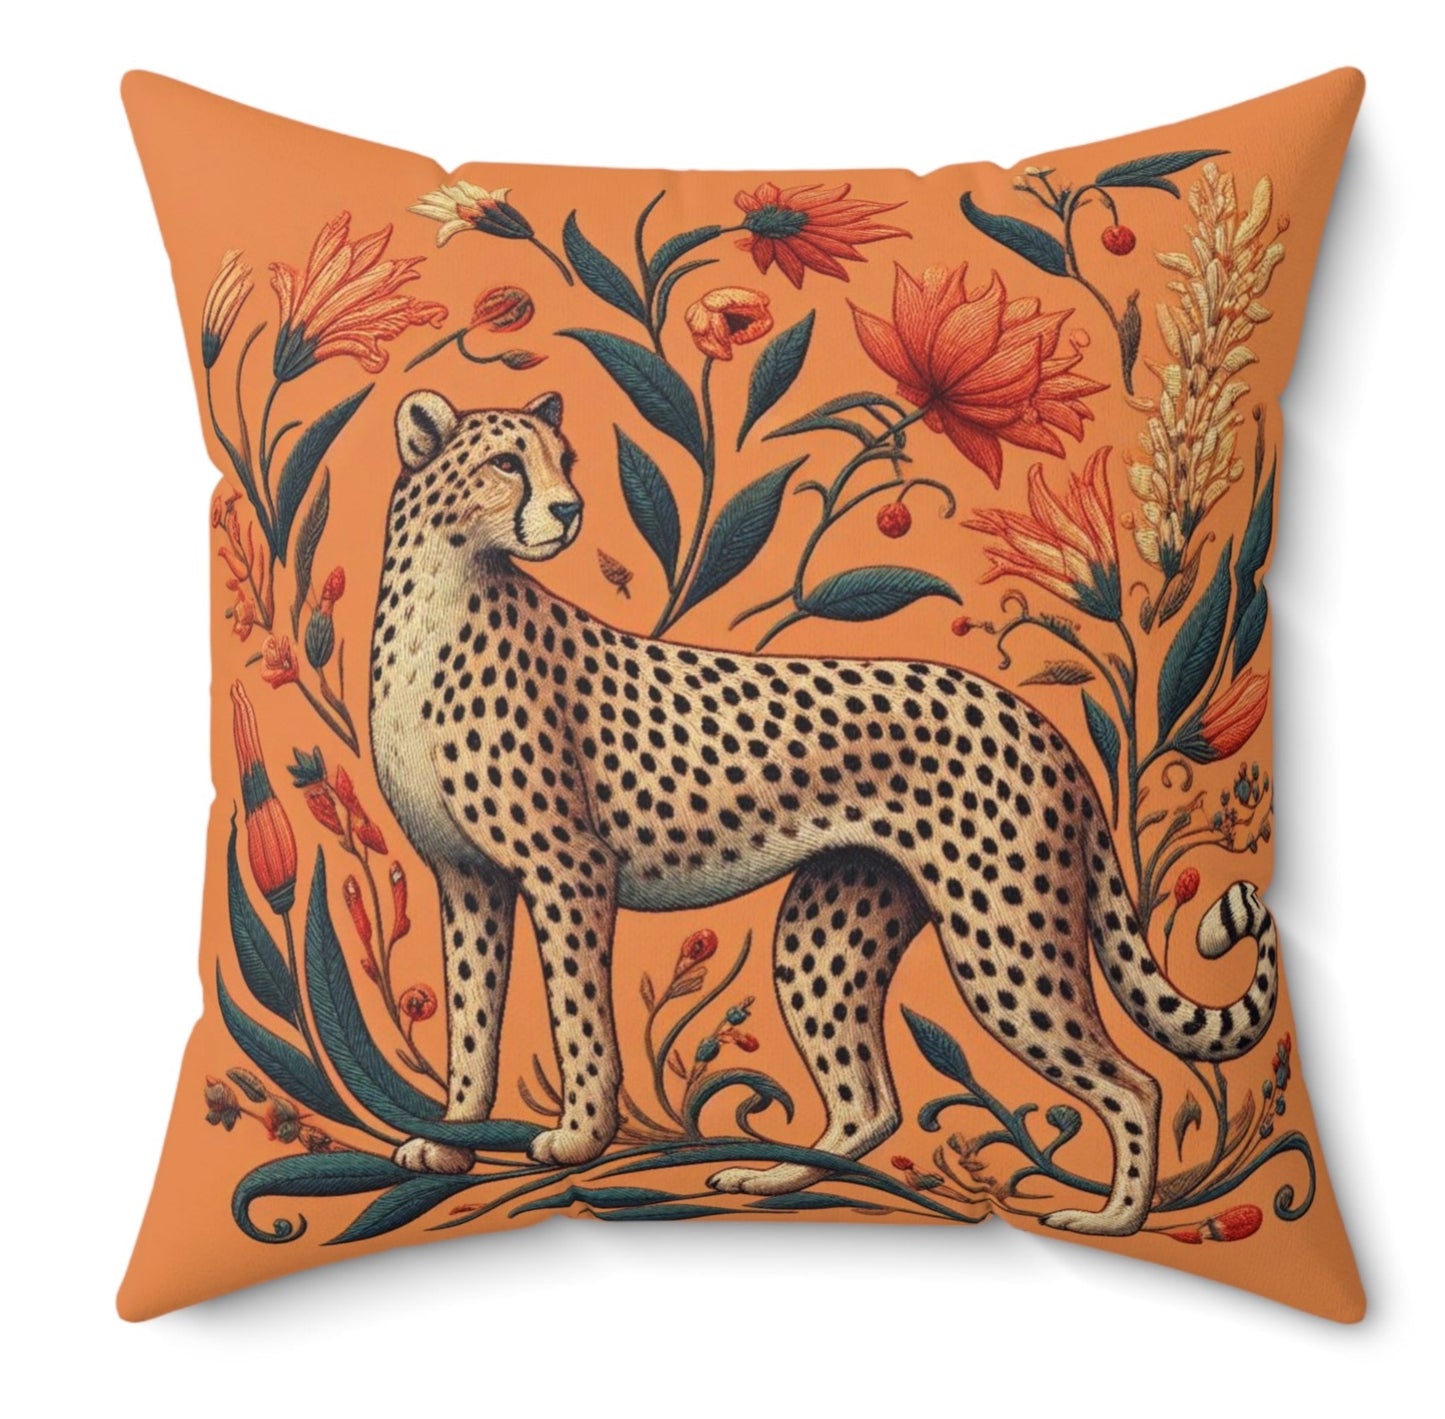 Eclectic Botanical Floral Orange Cheetah Maximalist Vintage Throw Pillows Polyester Cushion Square Cover